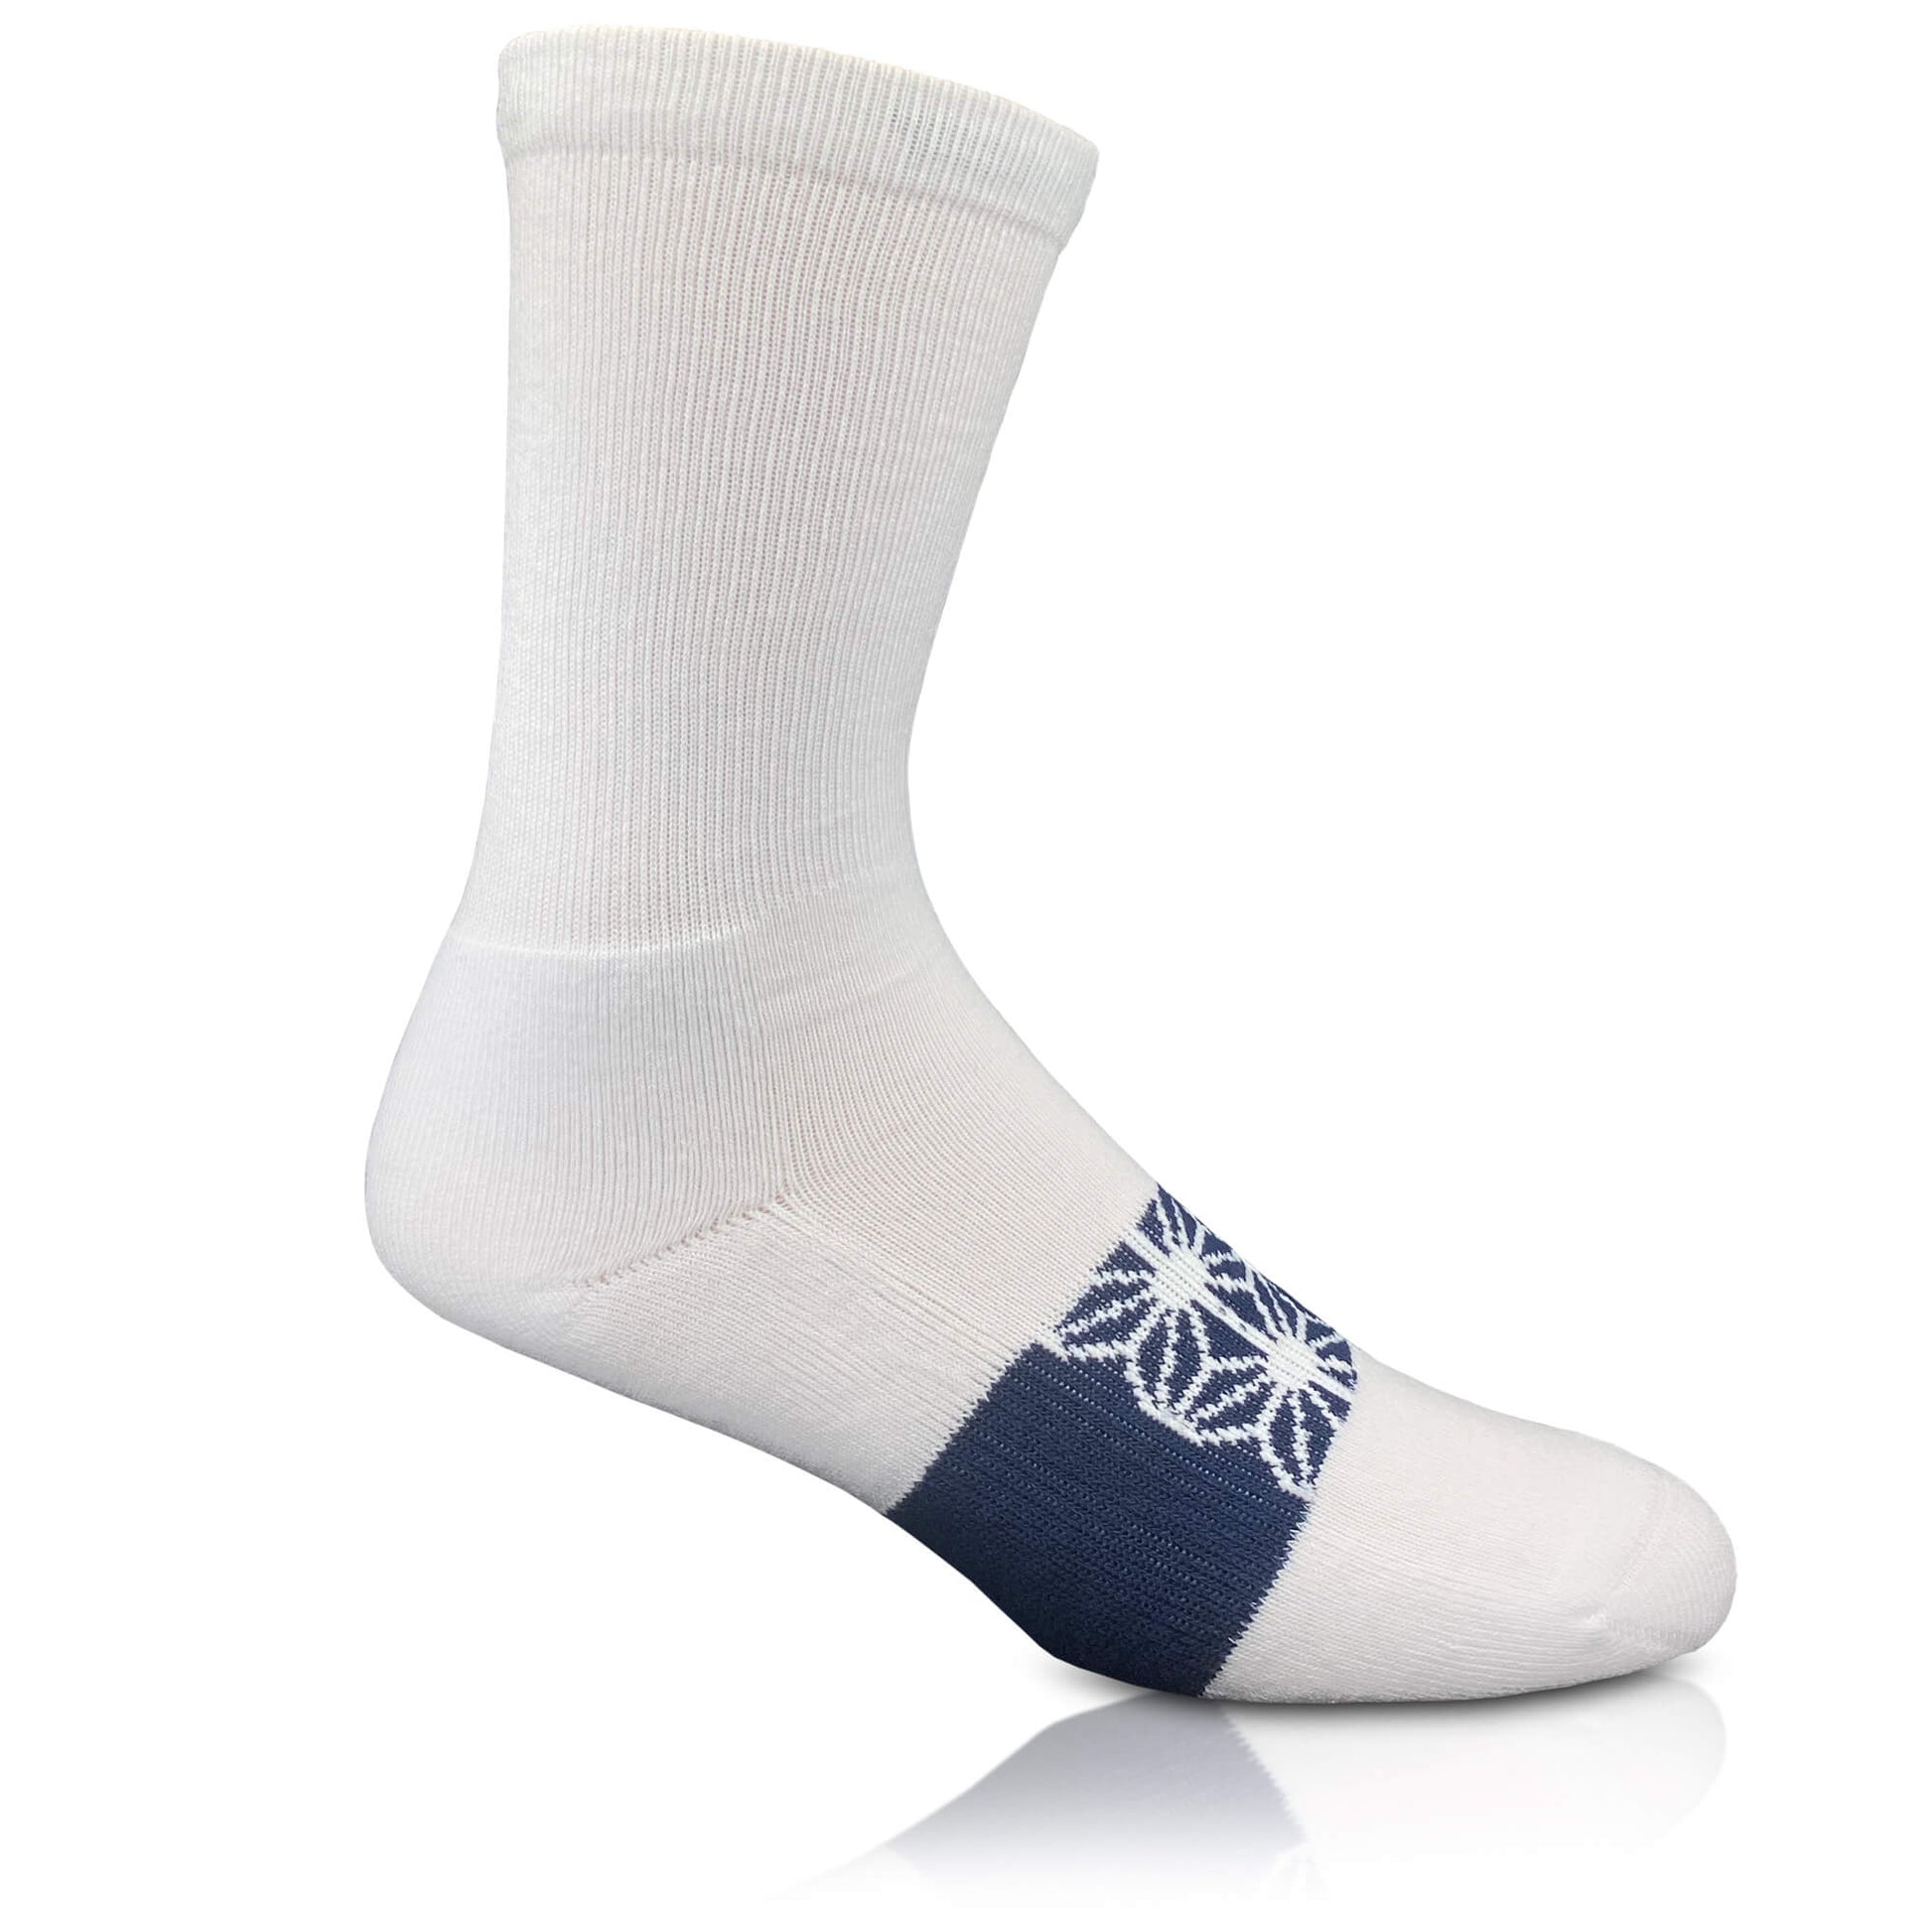 Modern Envy comfy crew socks White and Navy Blue side view